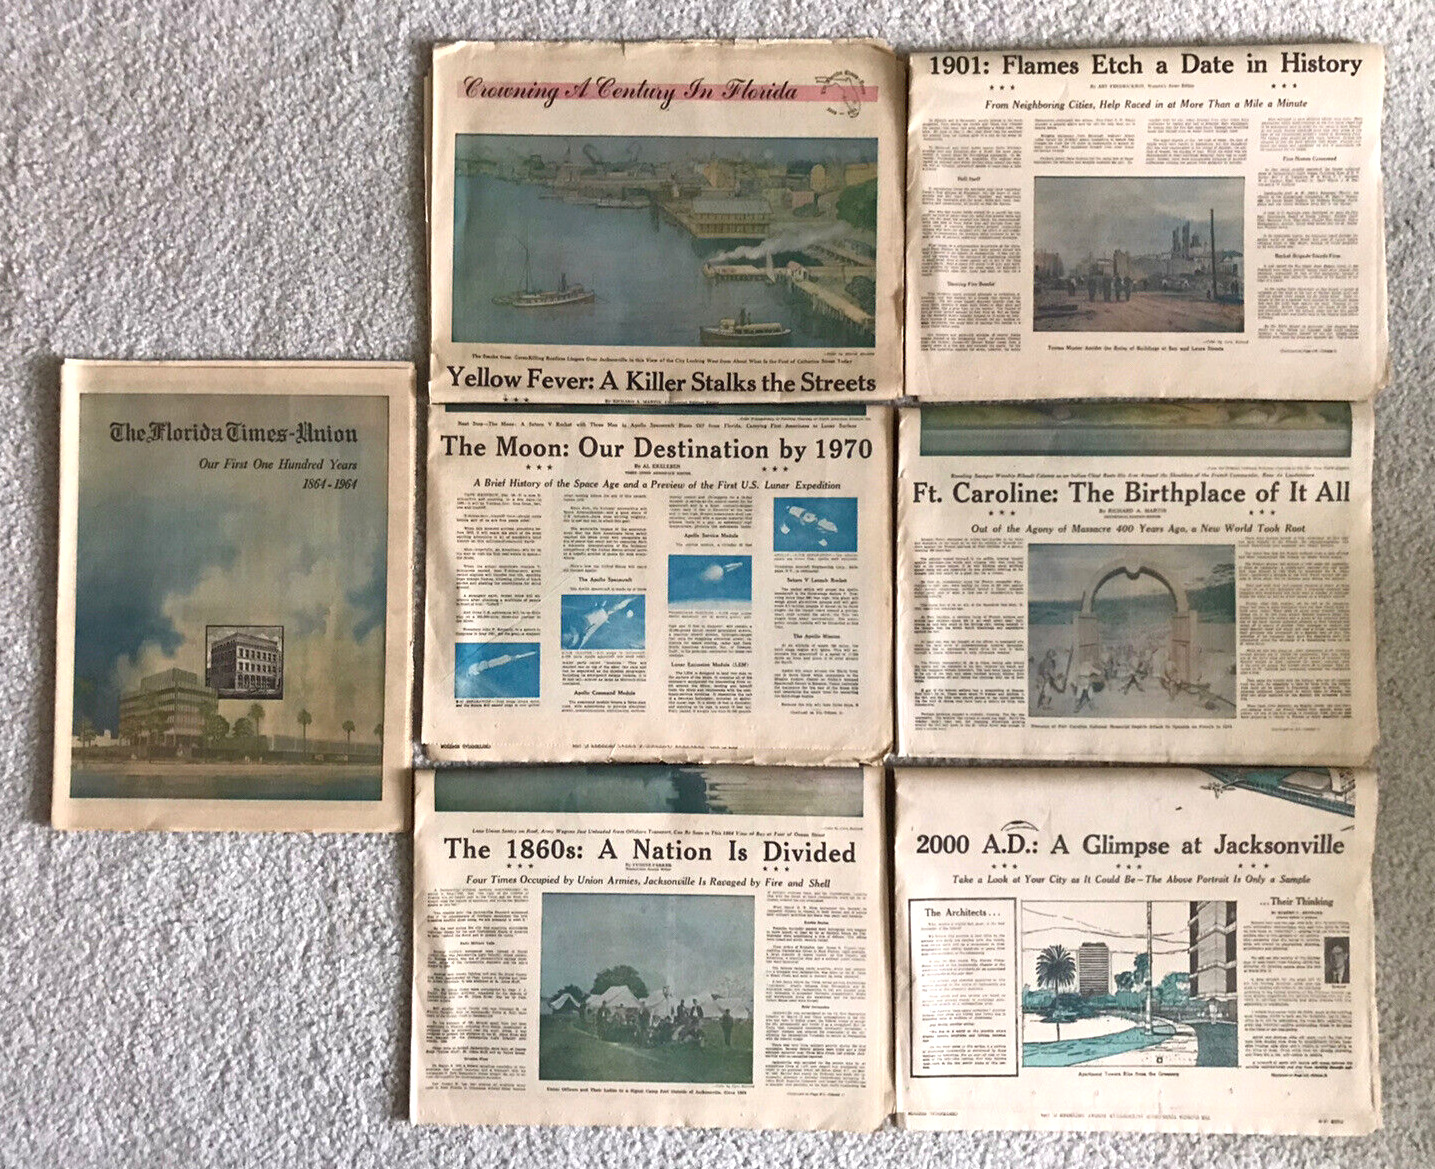 Crowning a Century in Florida - 7 Special Ed. Newspaper Sections, Dec 27, 1964